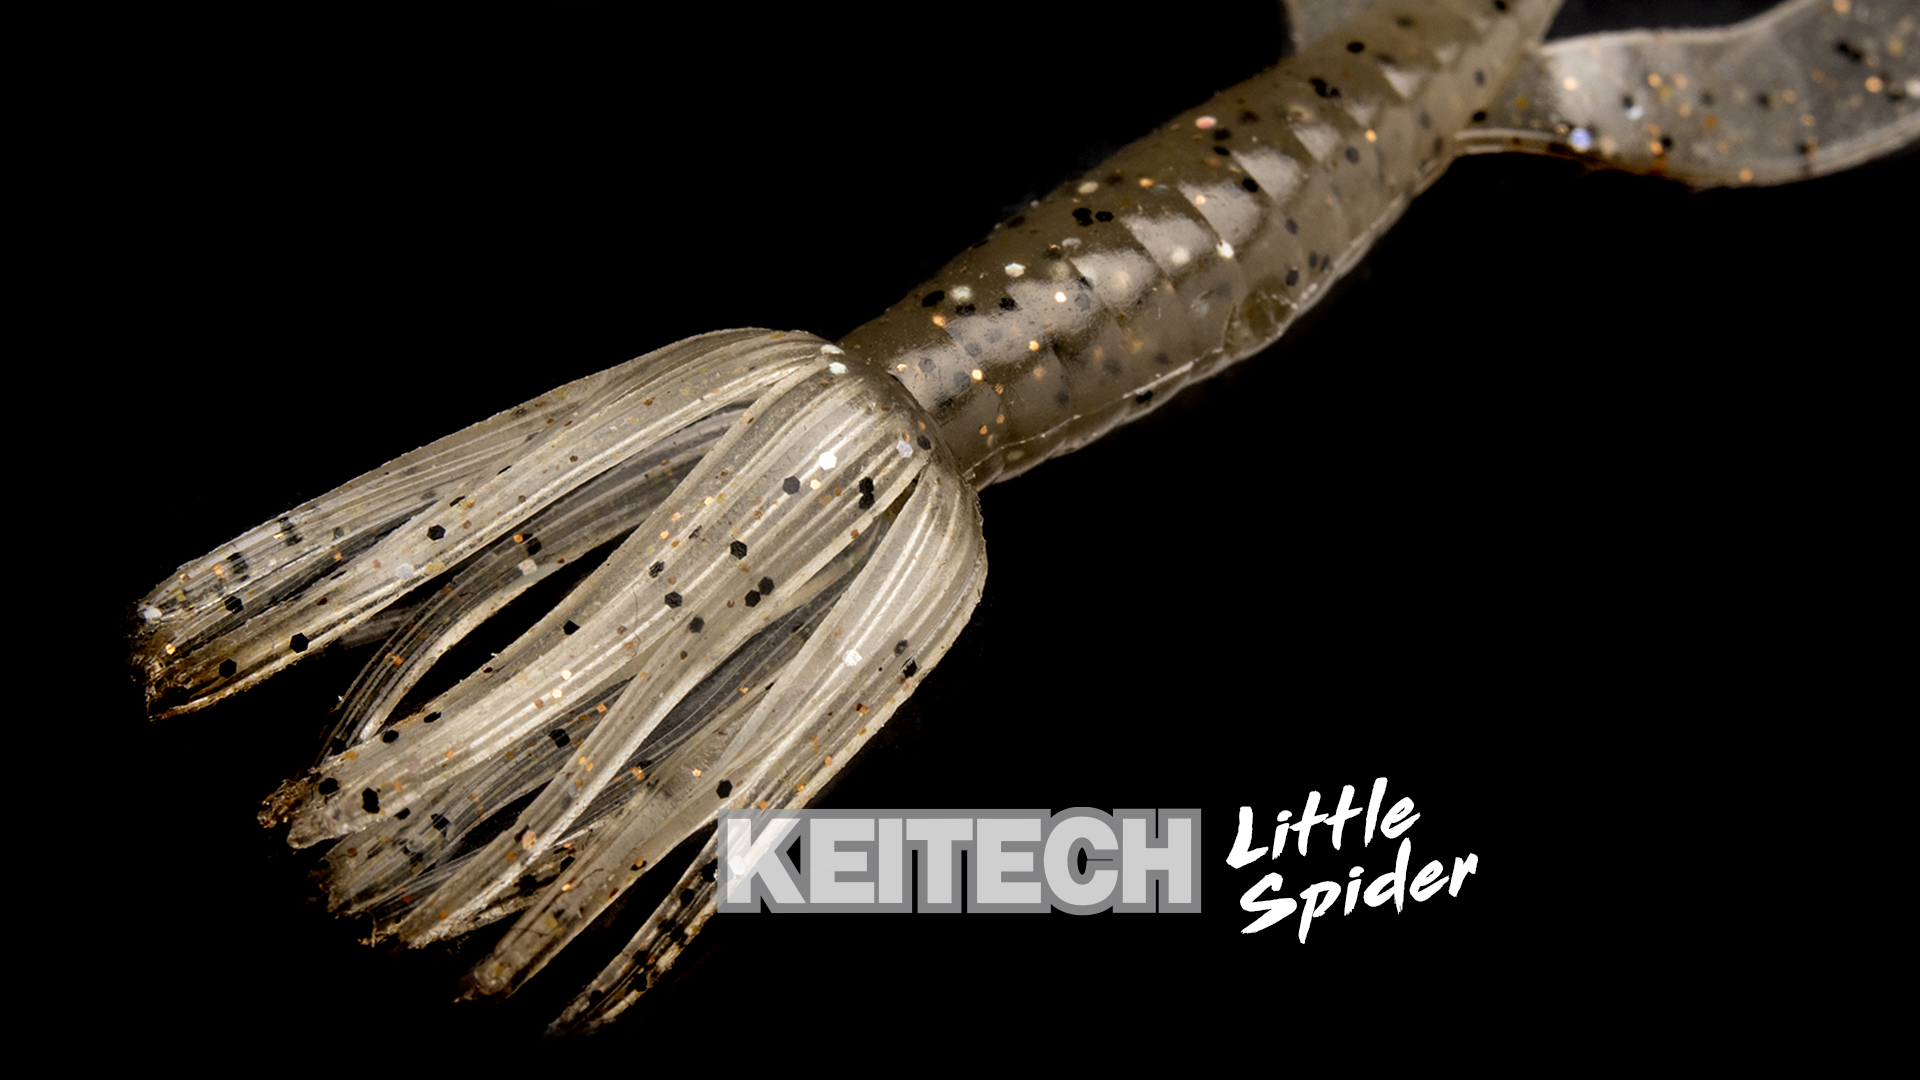 Little Spider – Way Of Fishing